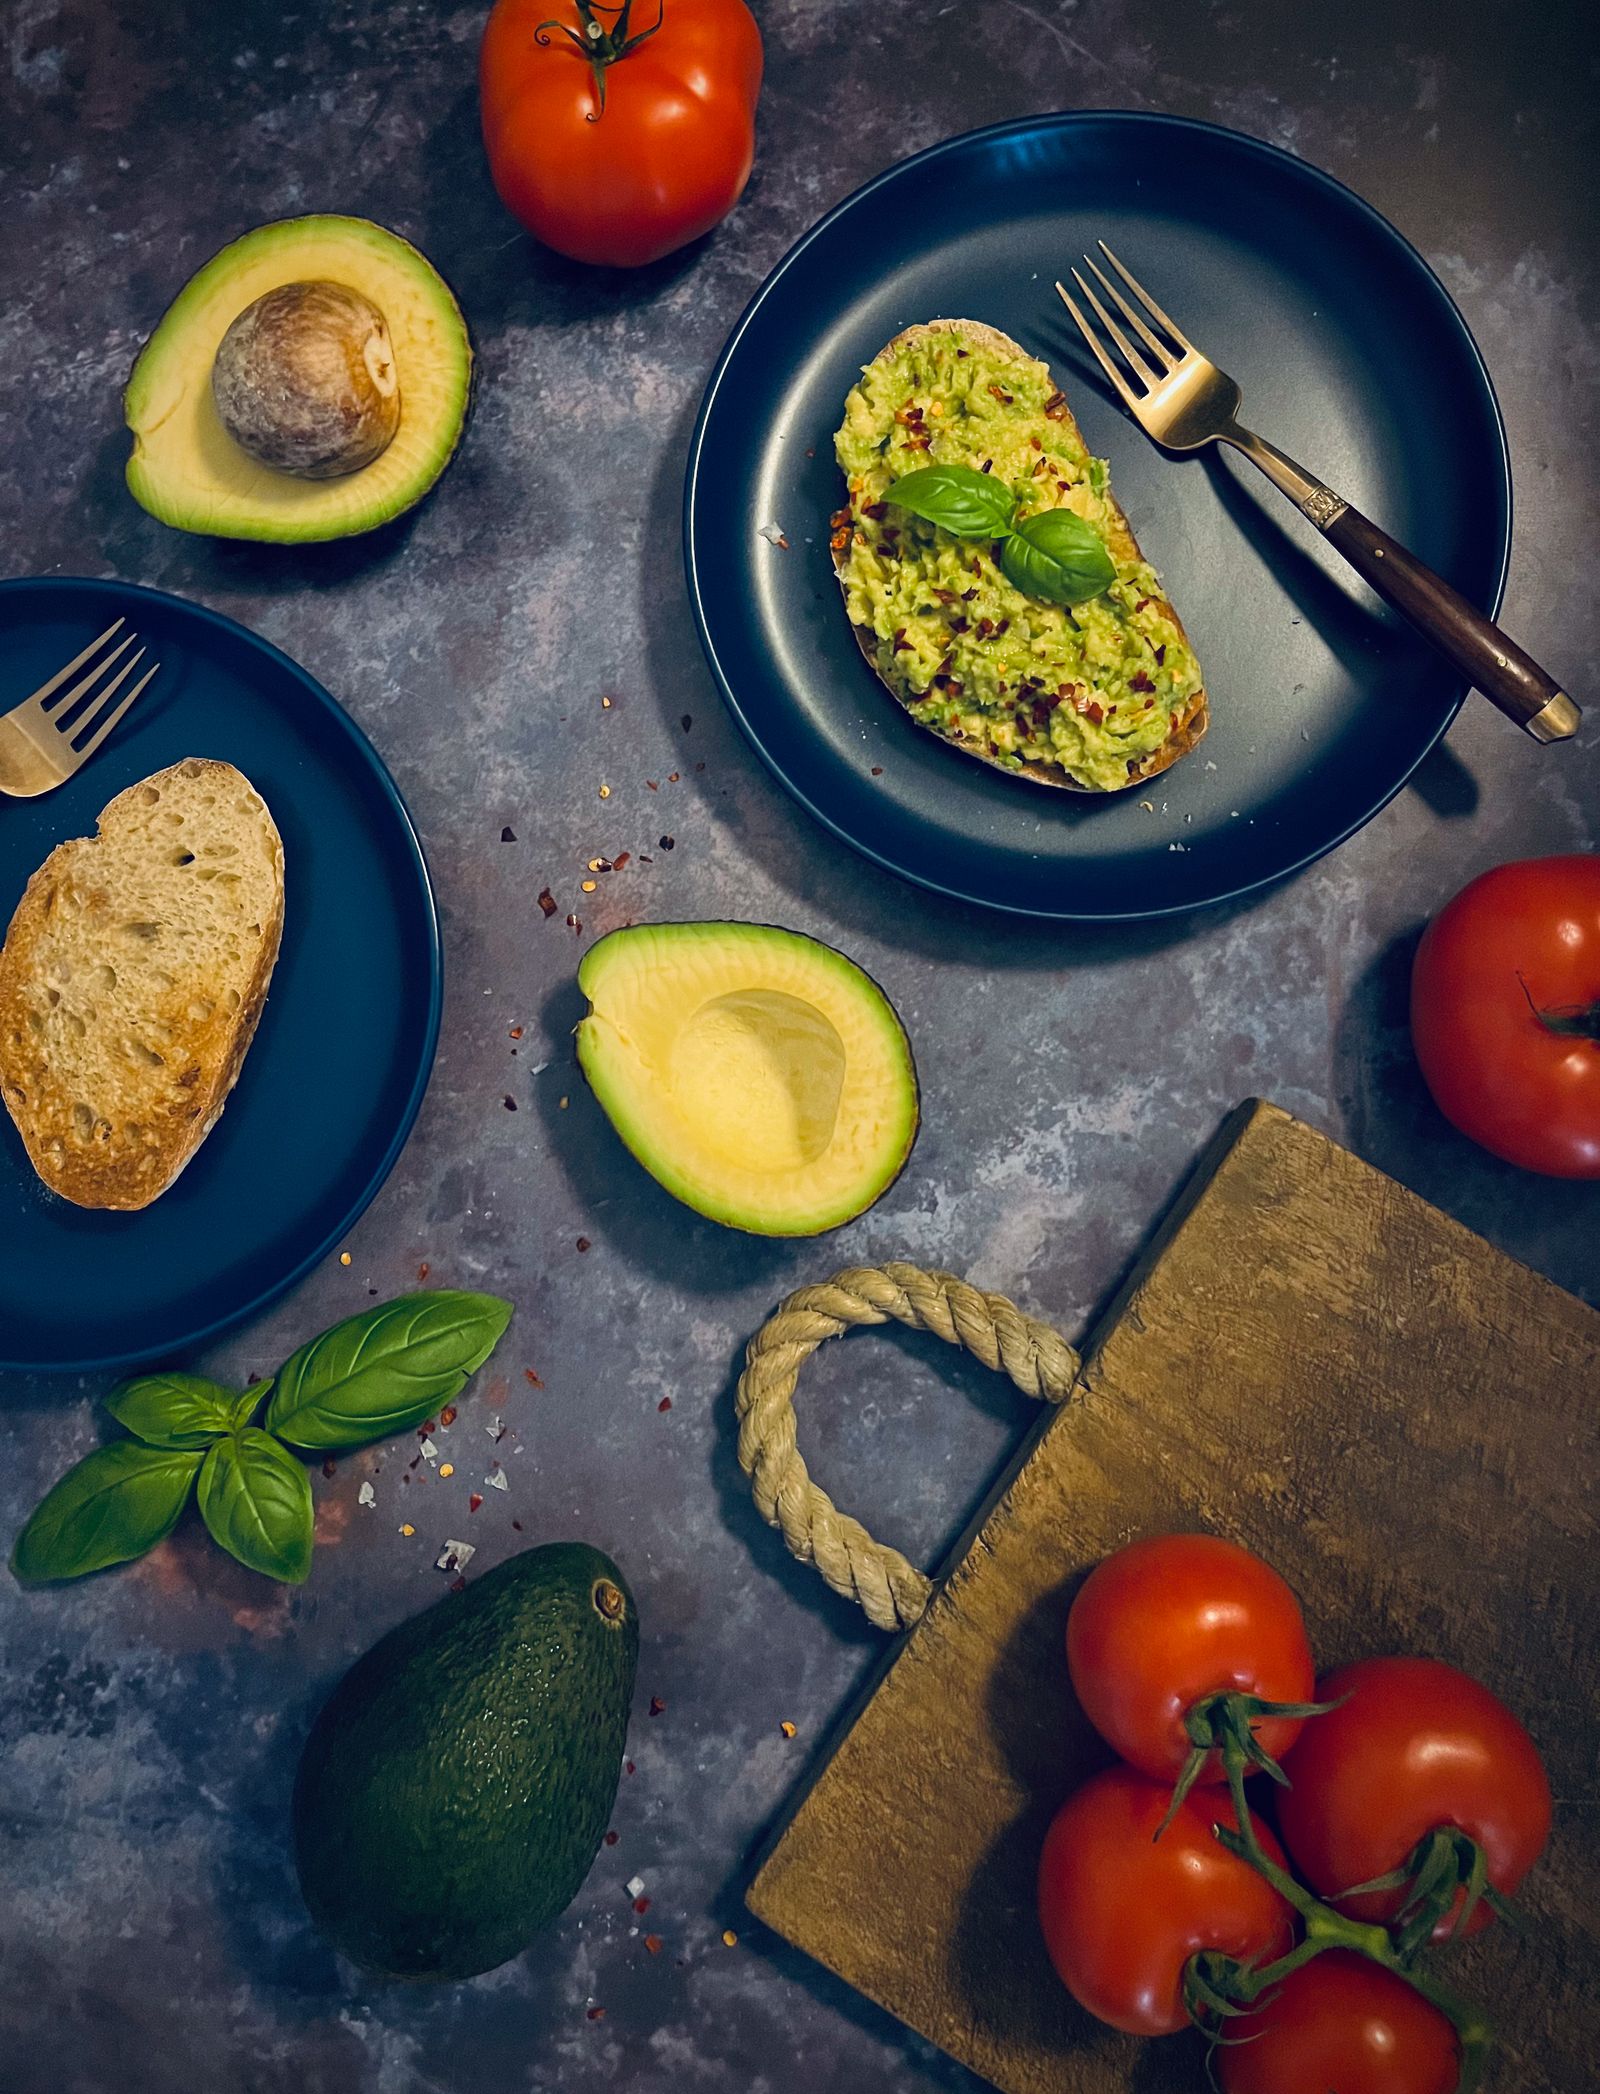 Tomatoes and Avocados